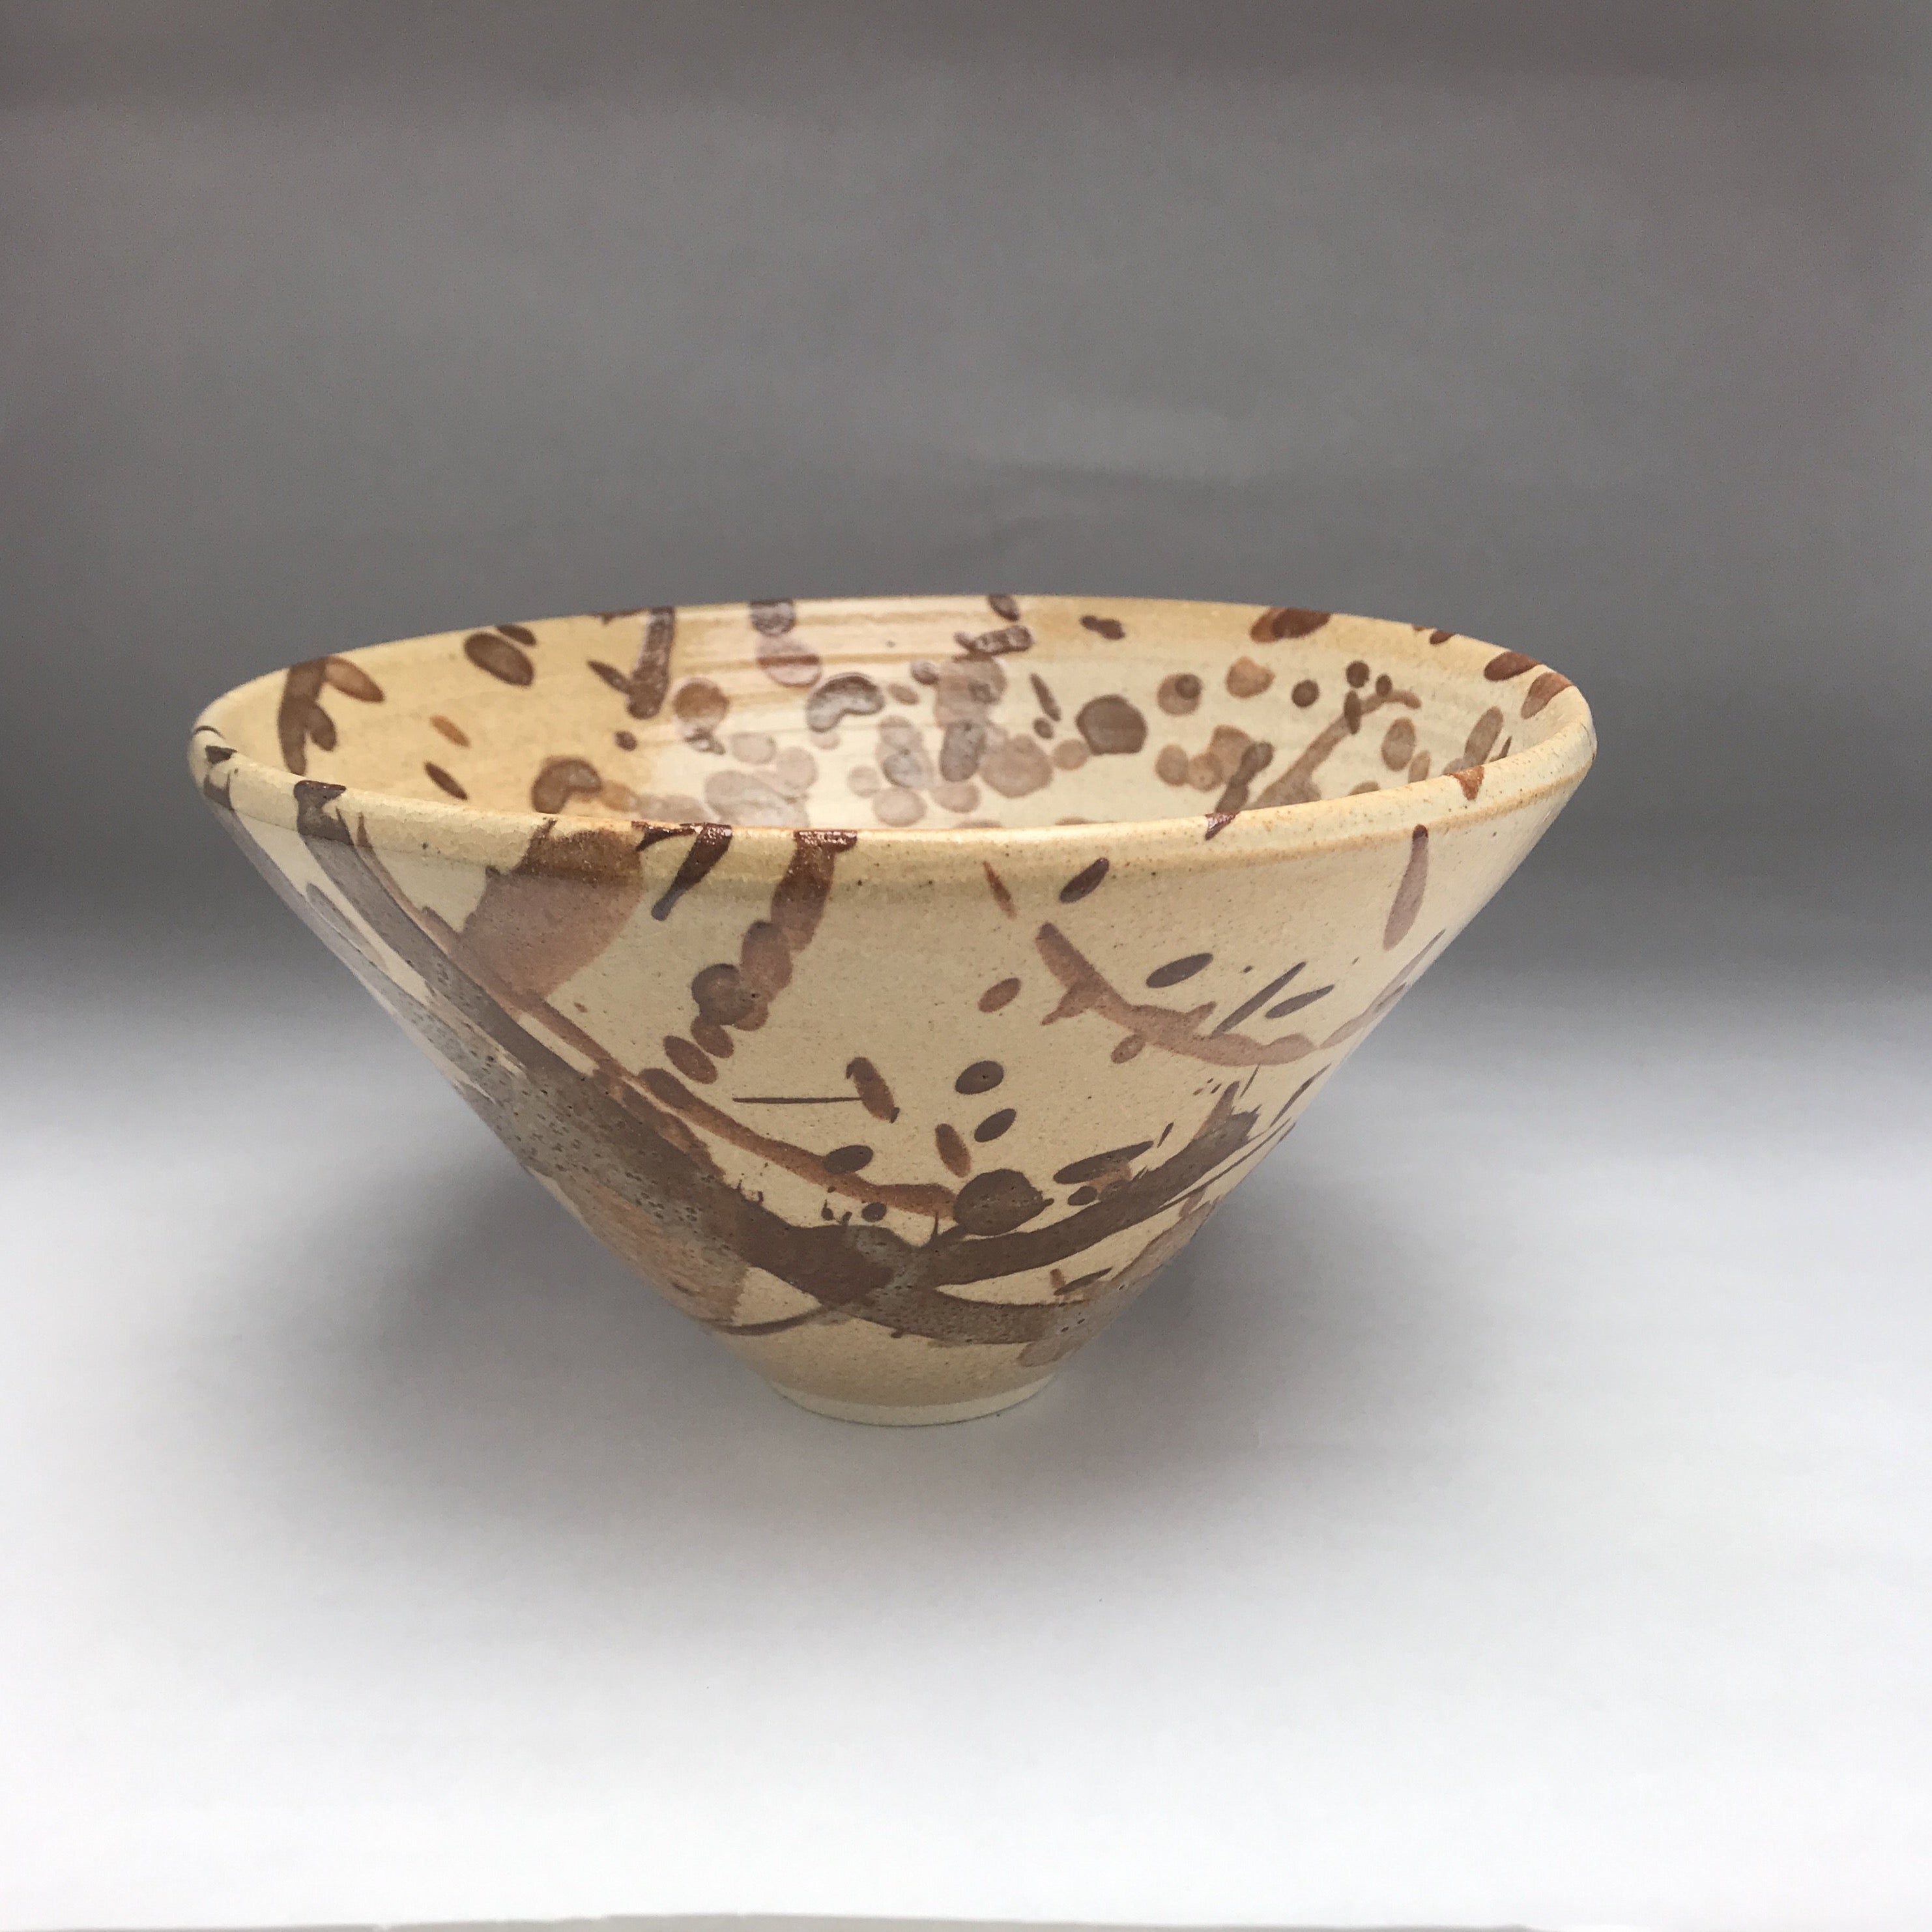 ceramic pottery bowl pale brown with dark brown splatters and splashes